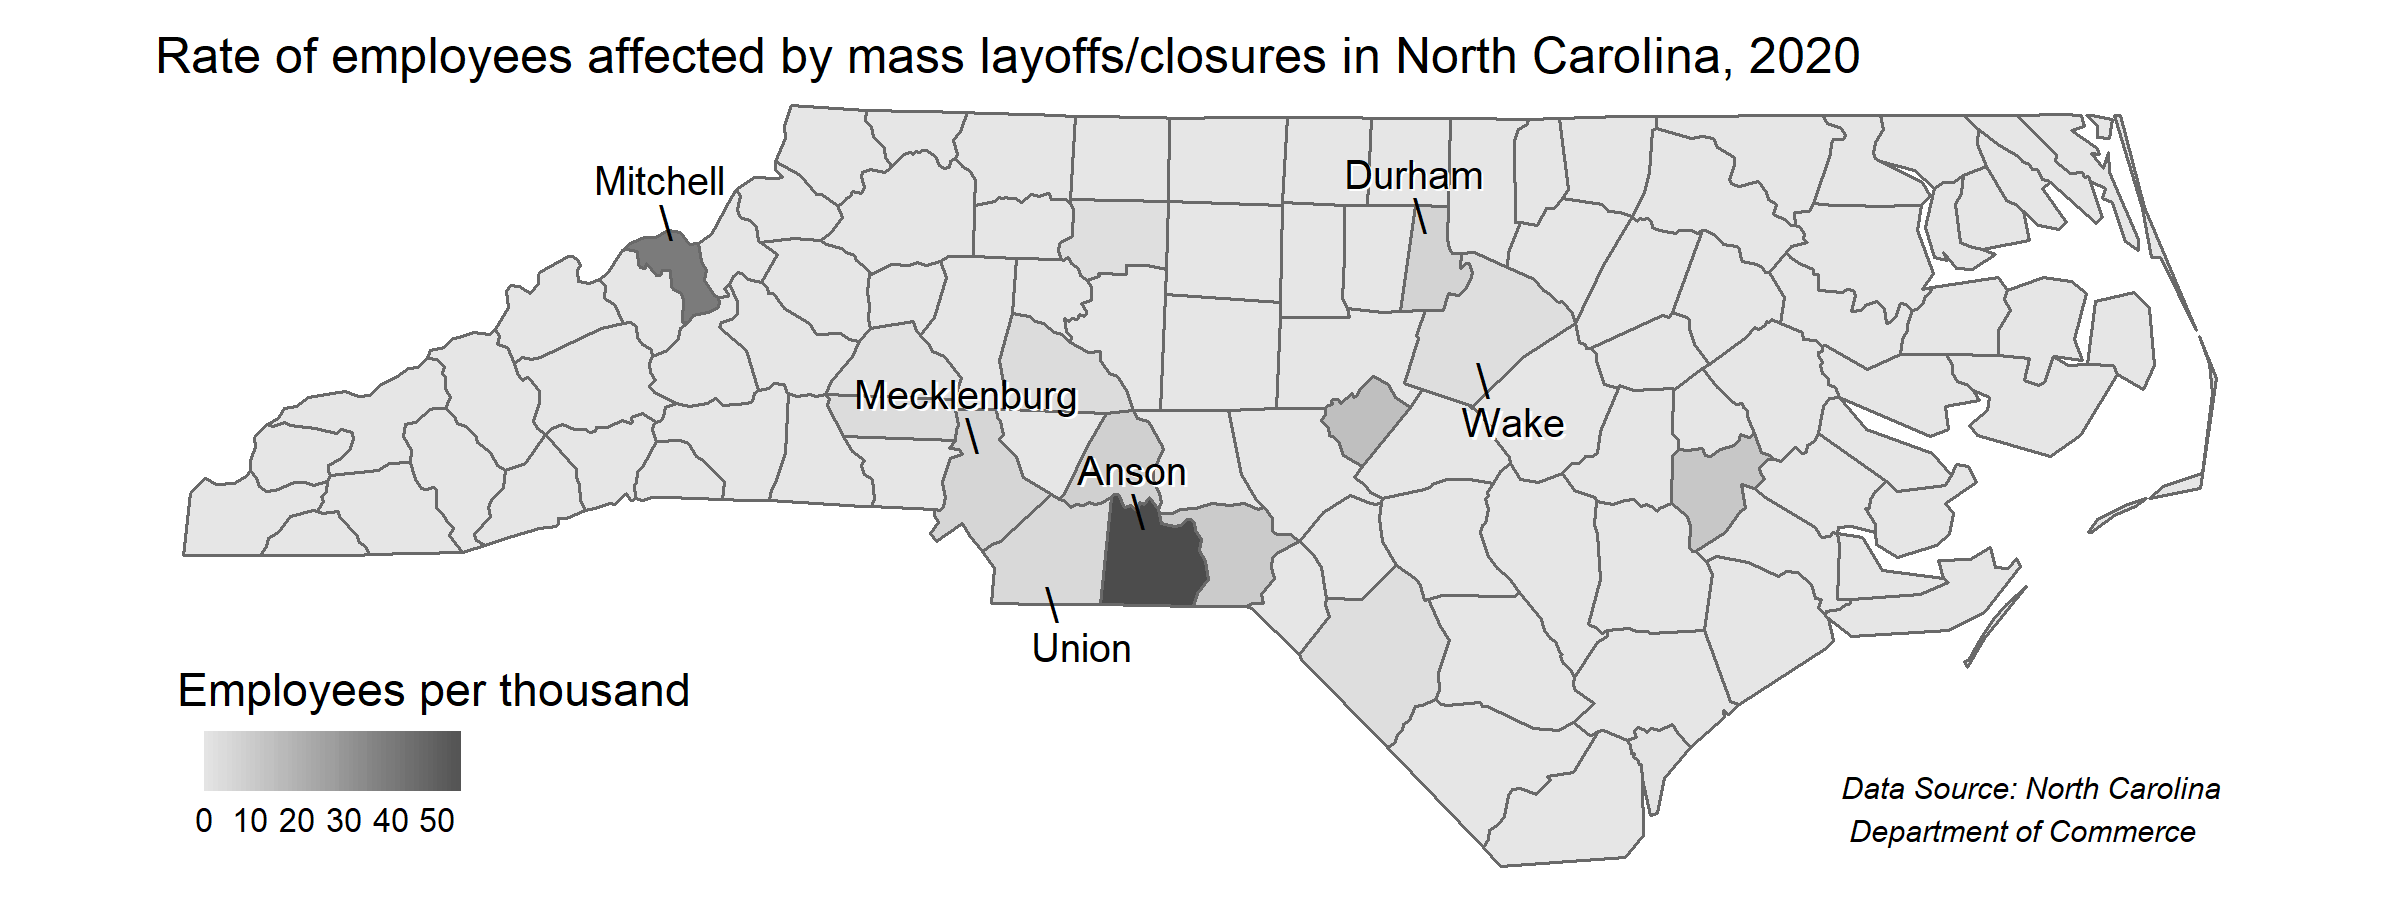 Figure 3: Map of North Carolina counties with the rate of employees per thousand affected by mass layoffs/closures. Anson and Mitchell have the highest totals, represented in dark gray.